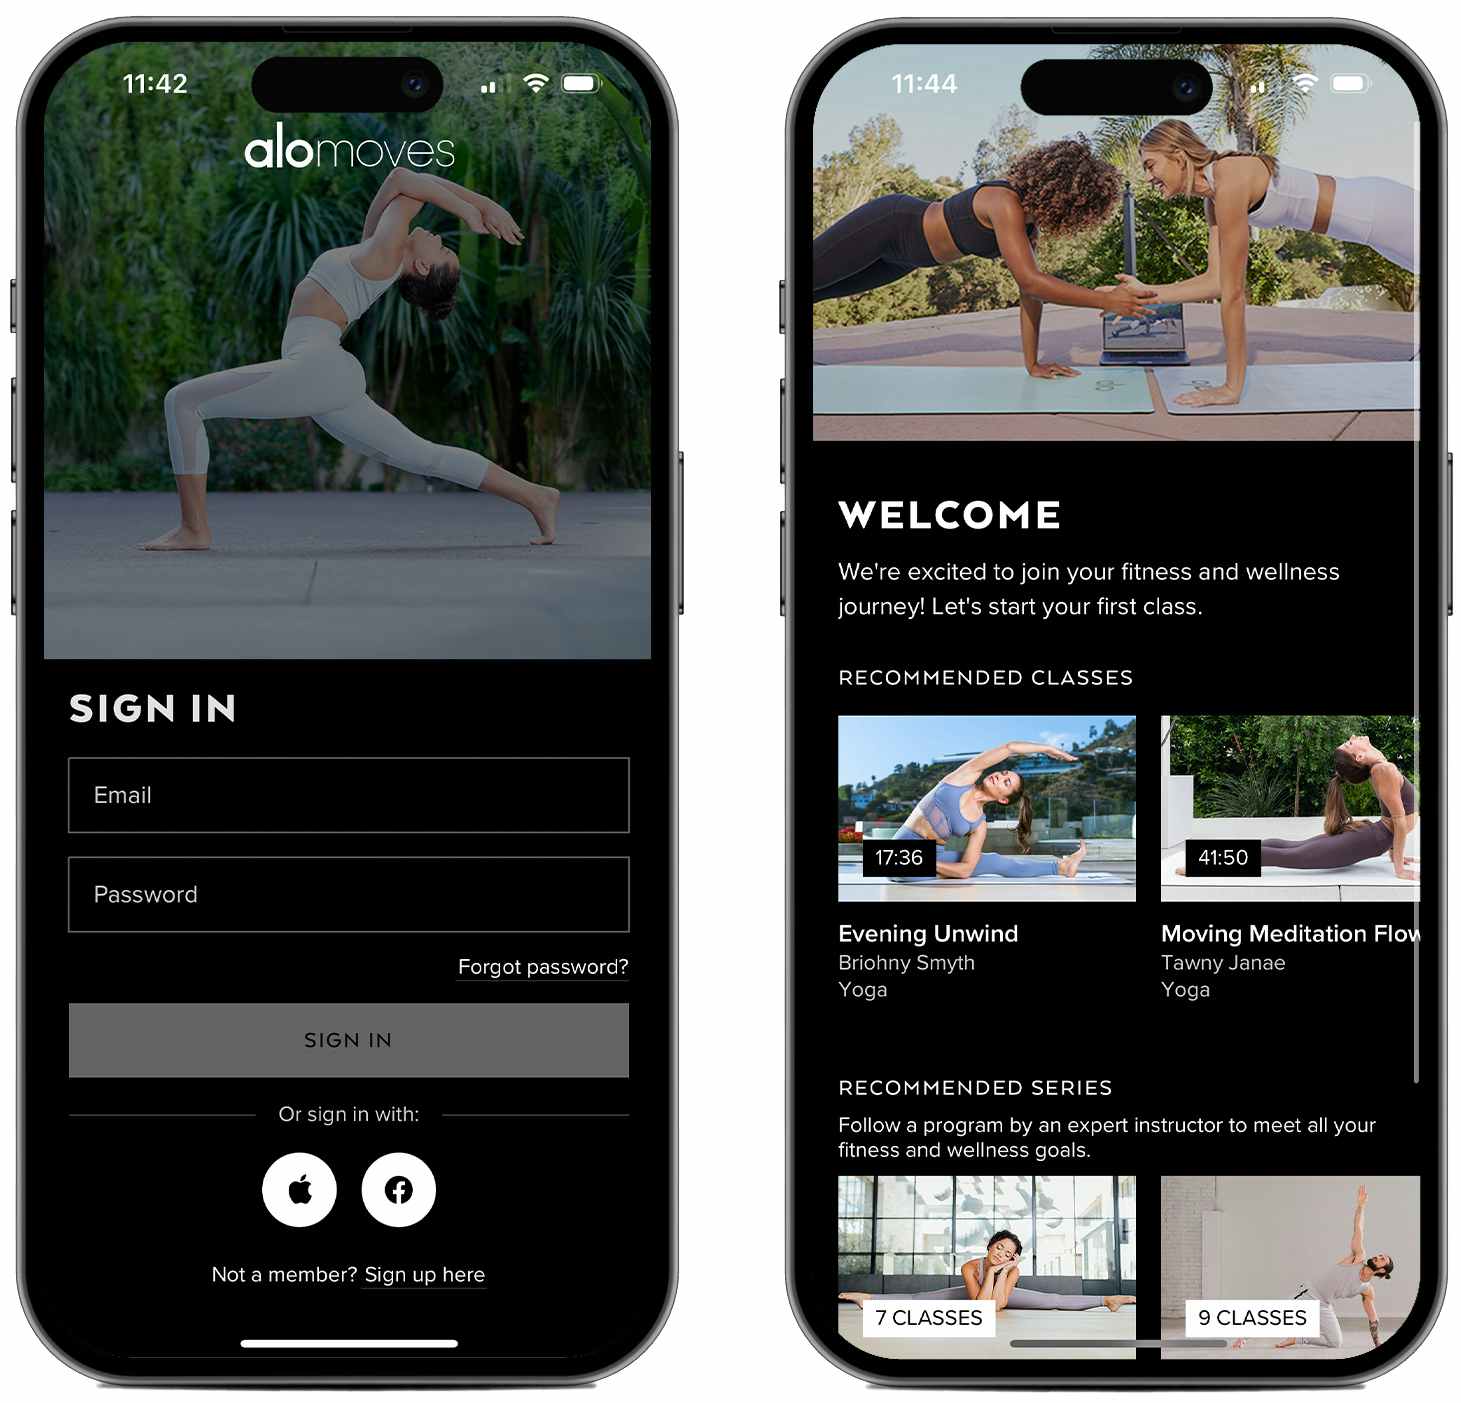 Screenshots from the AloMoves fitness app on two iPhone screens